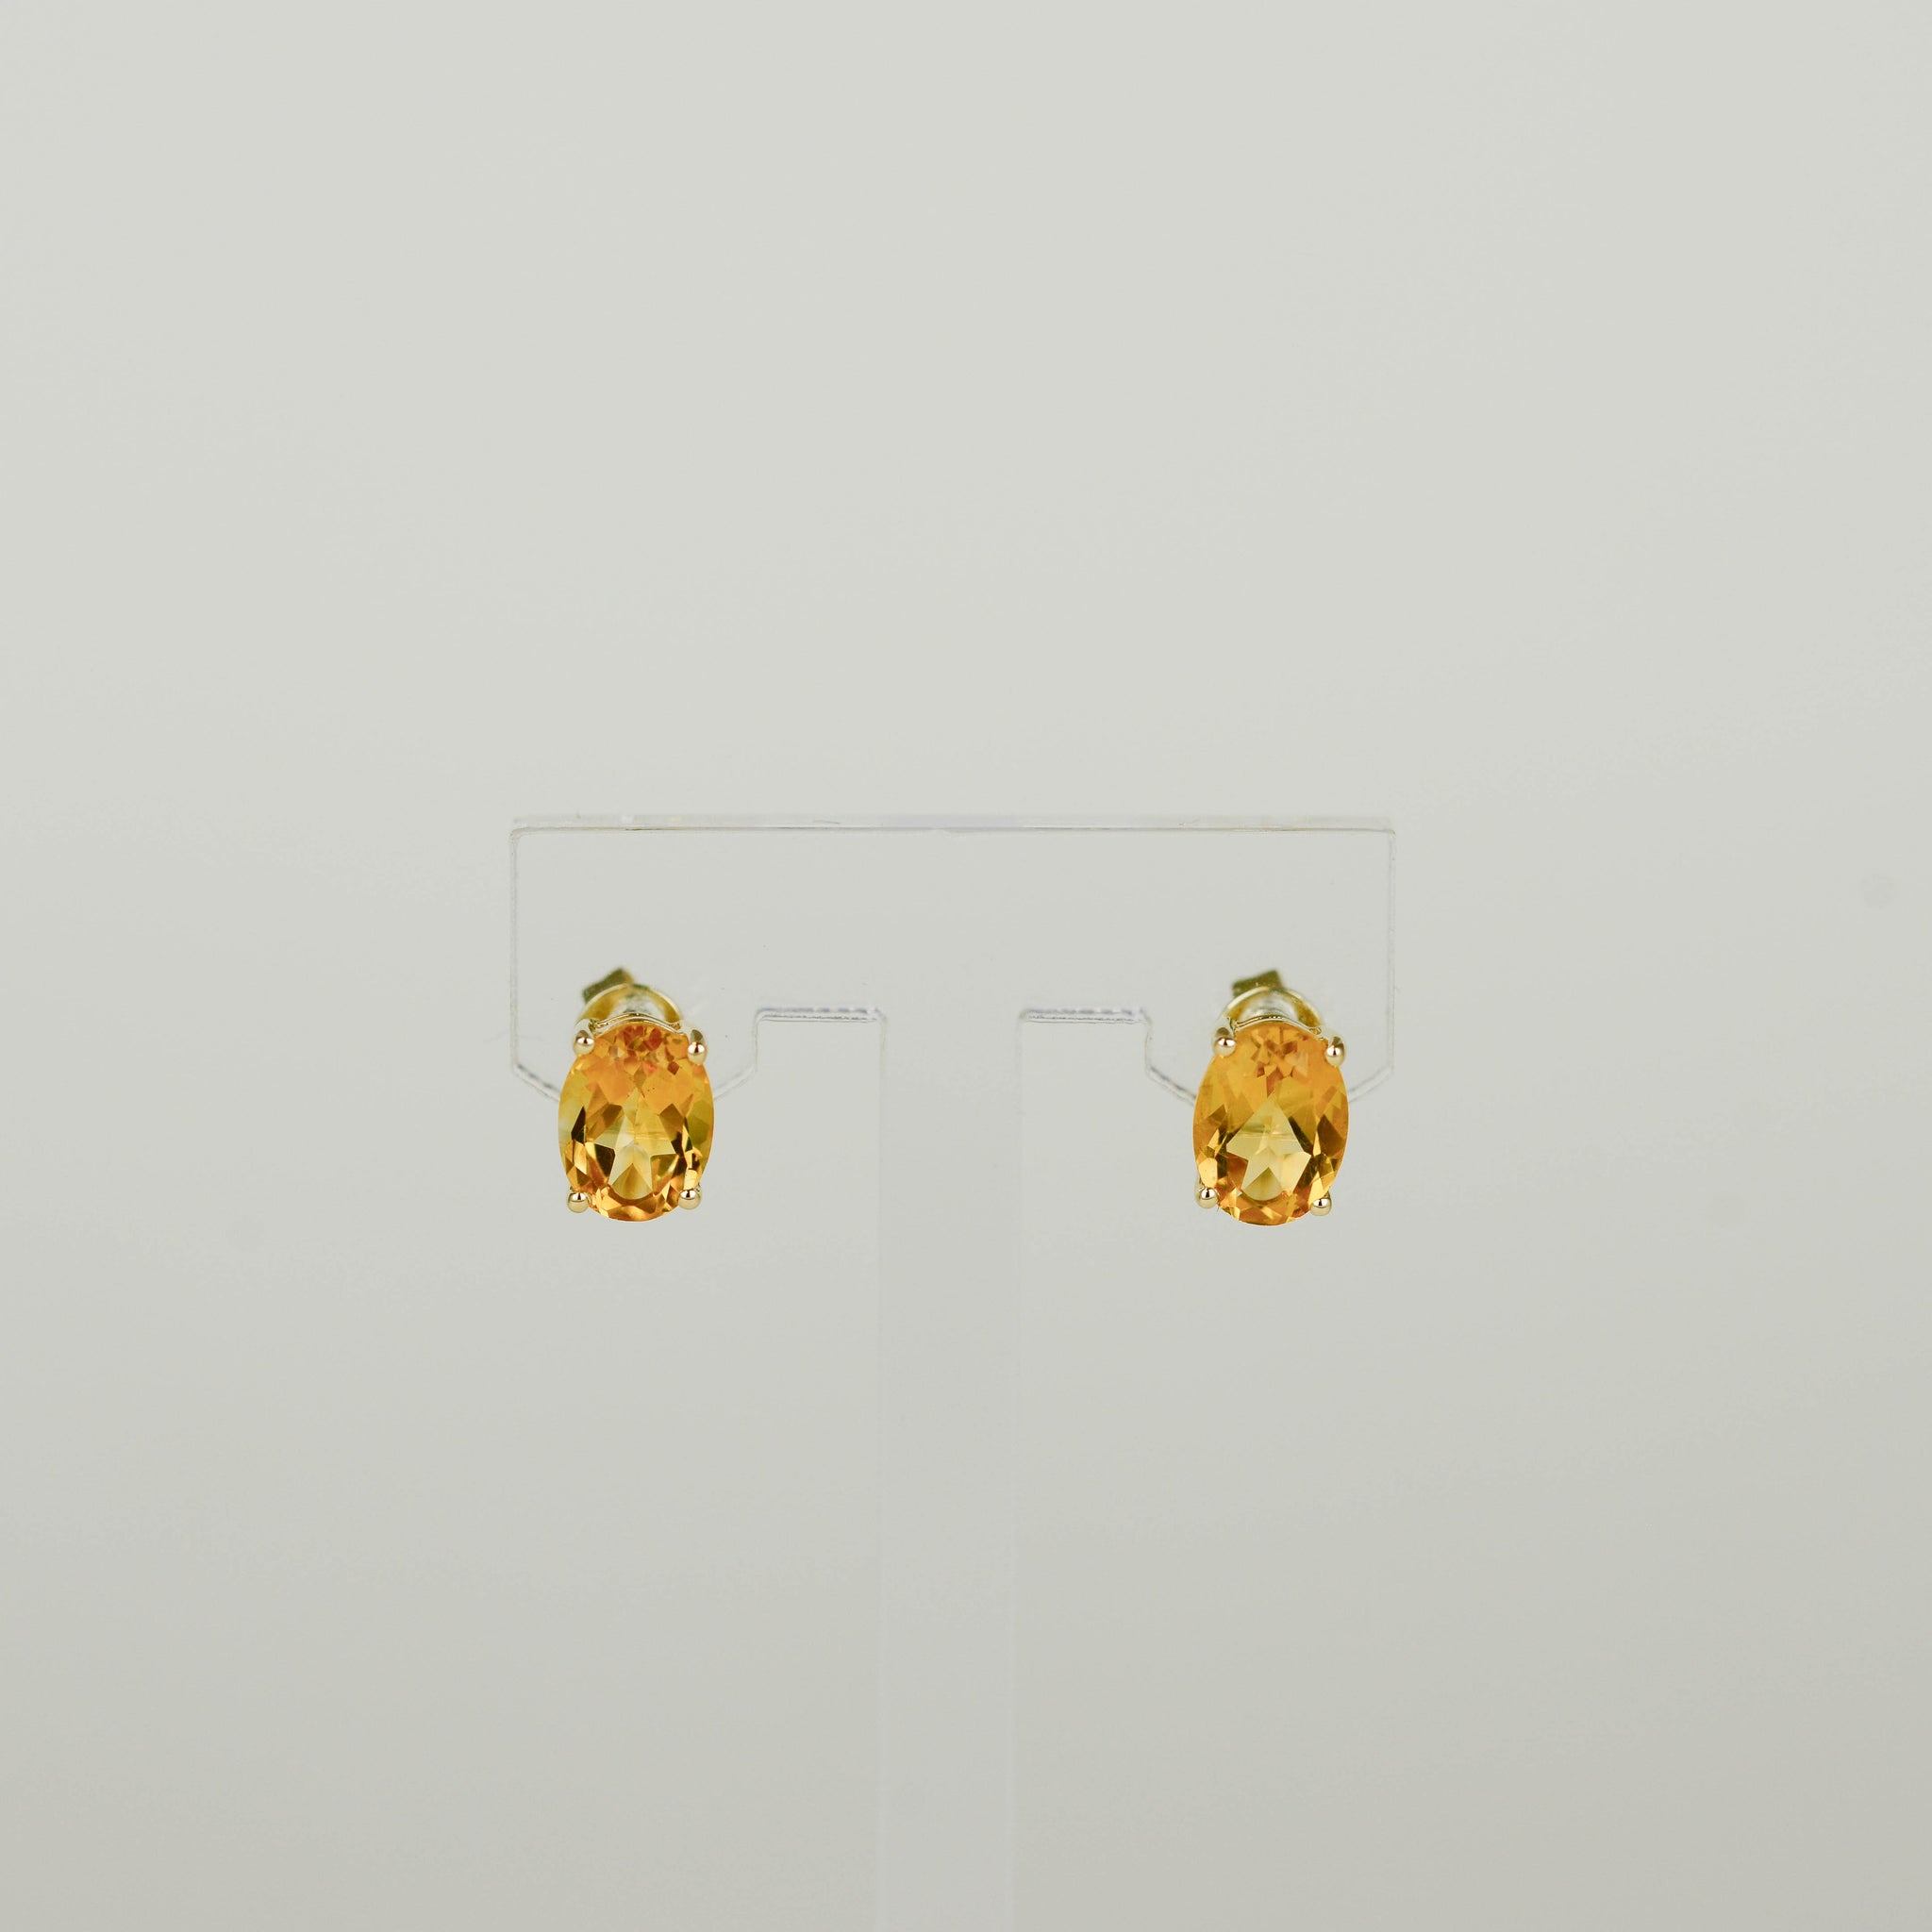 9ct Yellow Gold 2.36ct Oval Cut Citrine Stud Earrings